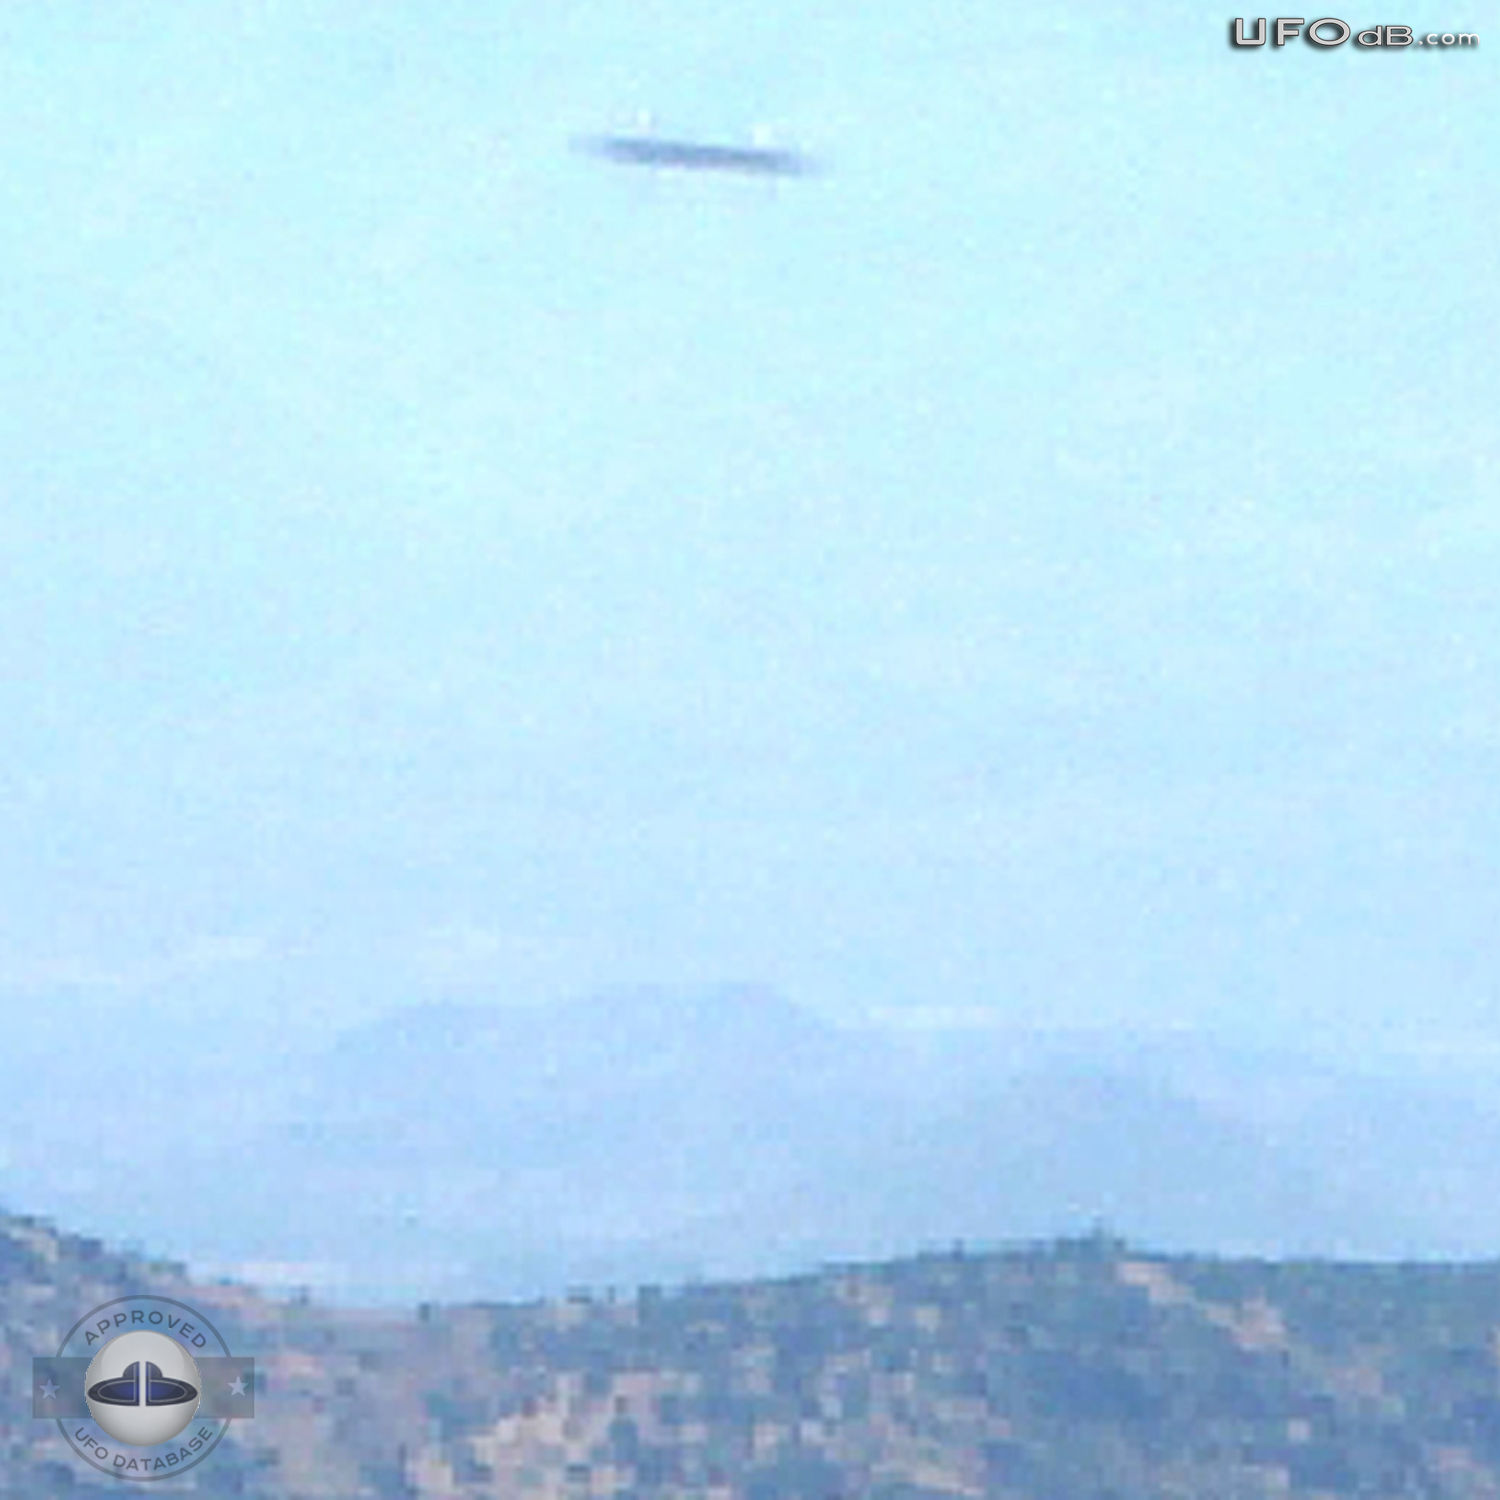 Colombia Saucer flying over the hills caught on picture | March 3 2003 UFO Picture #322-2